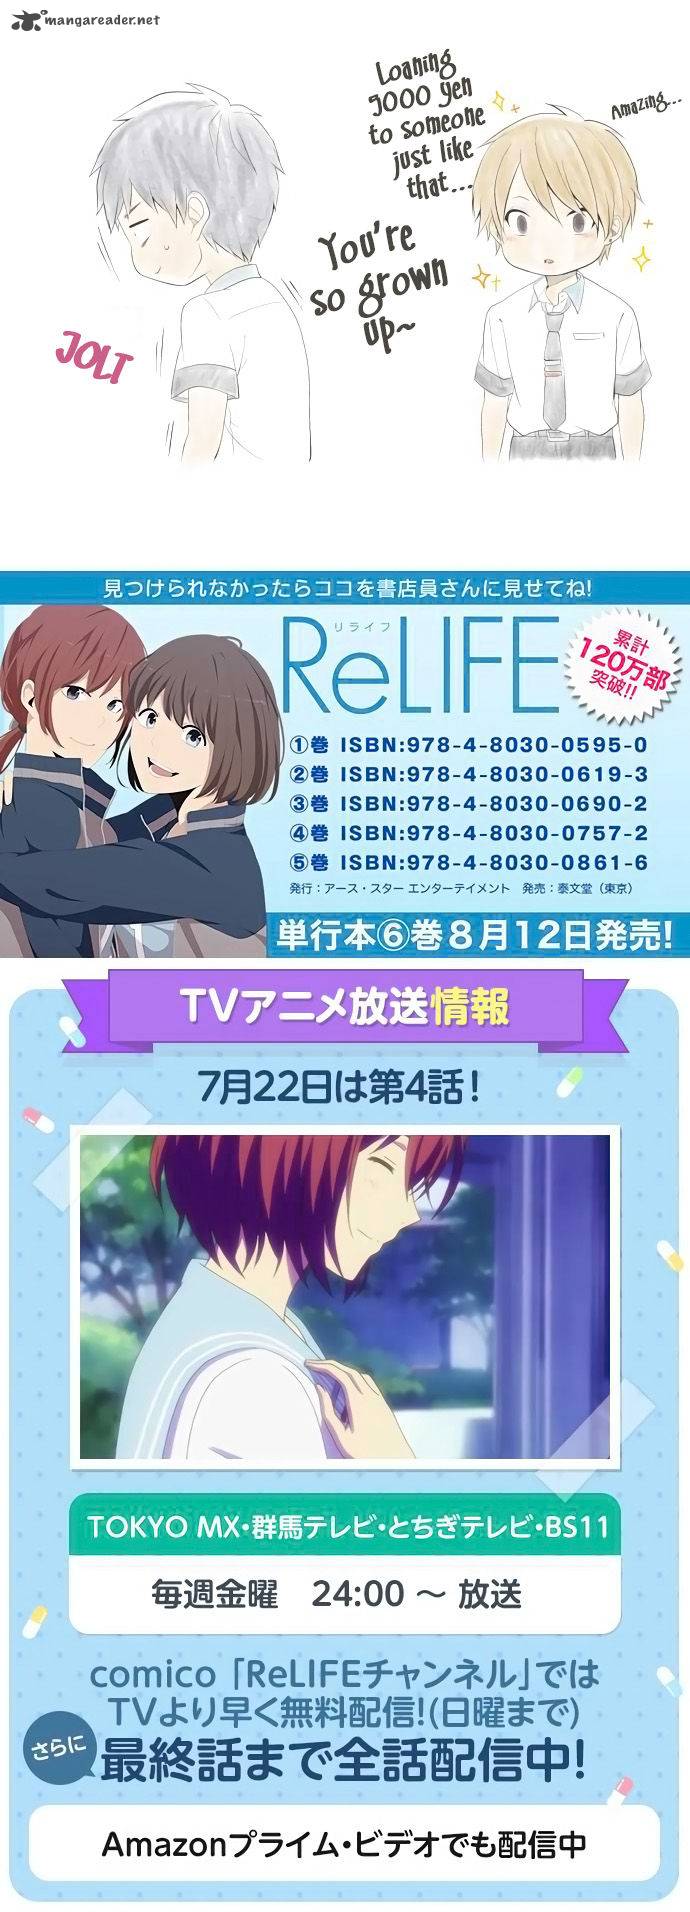 Relife 137 25